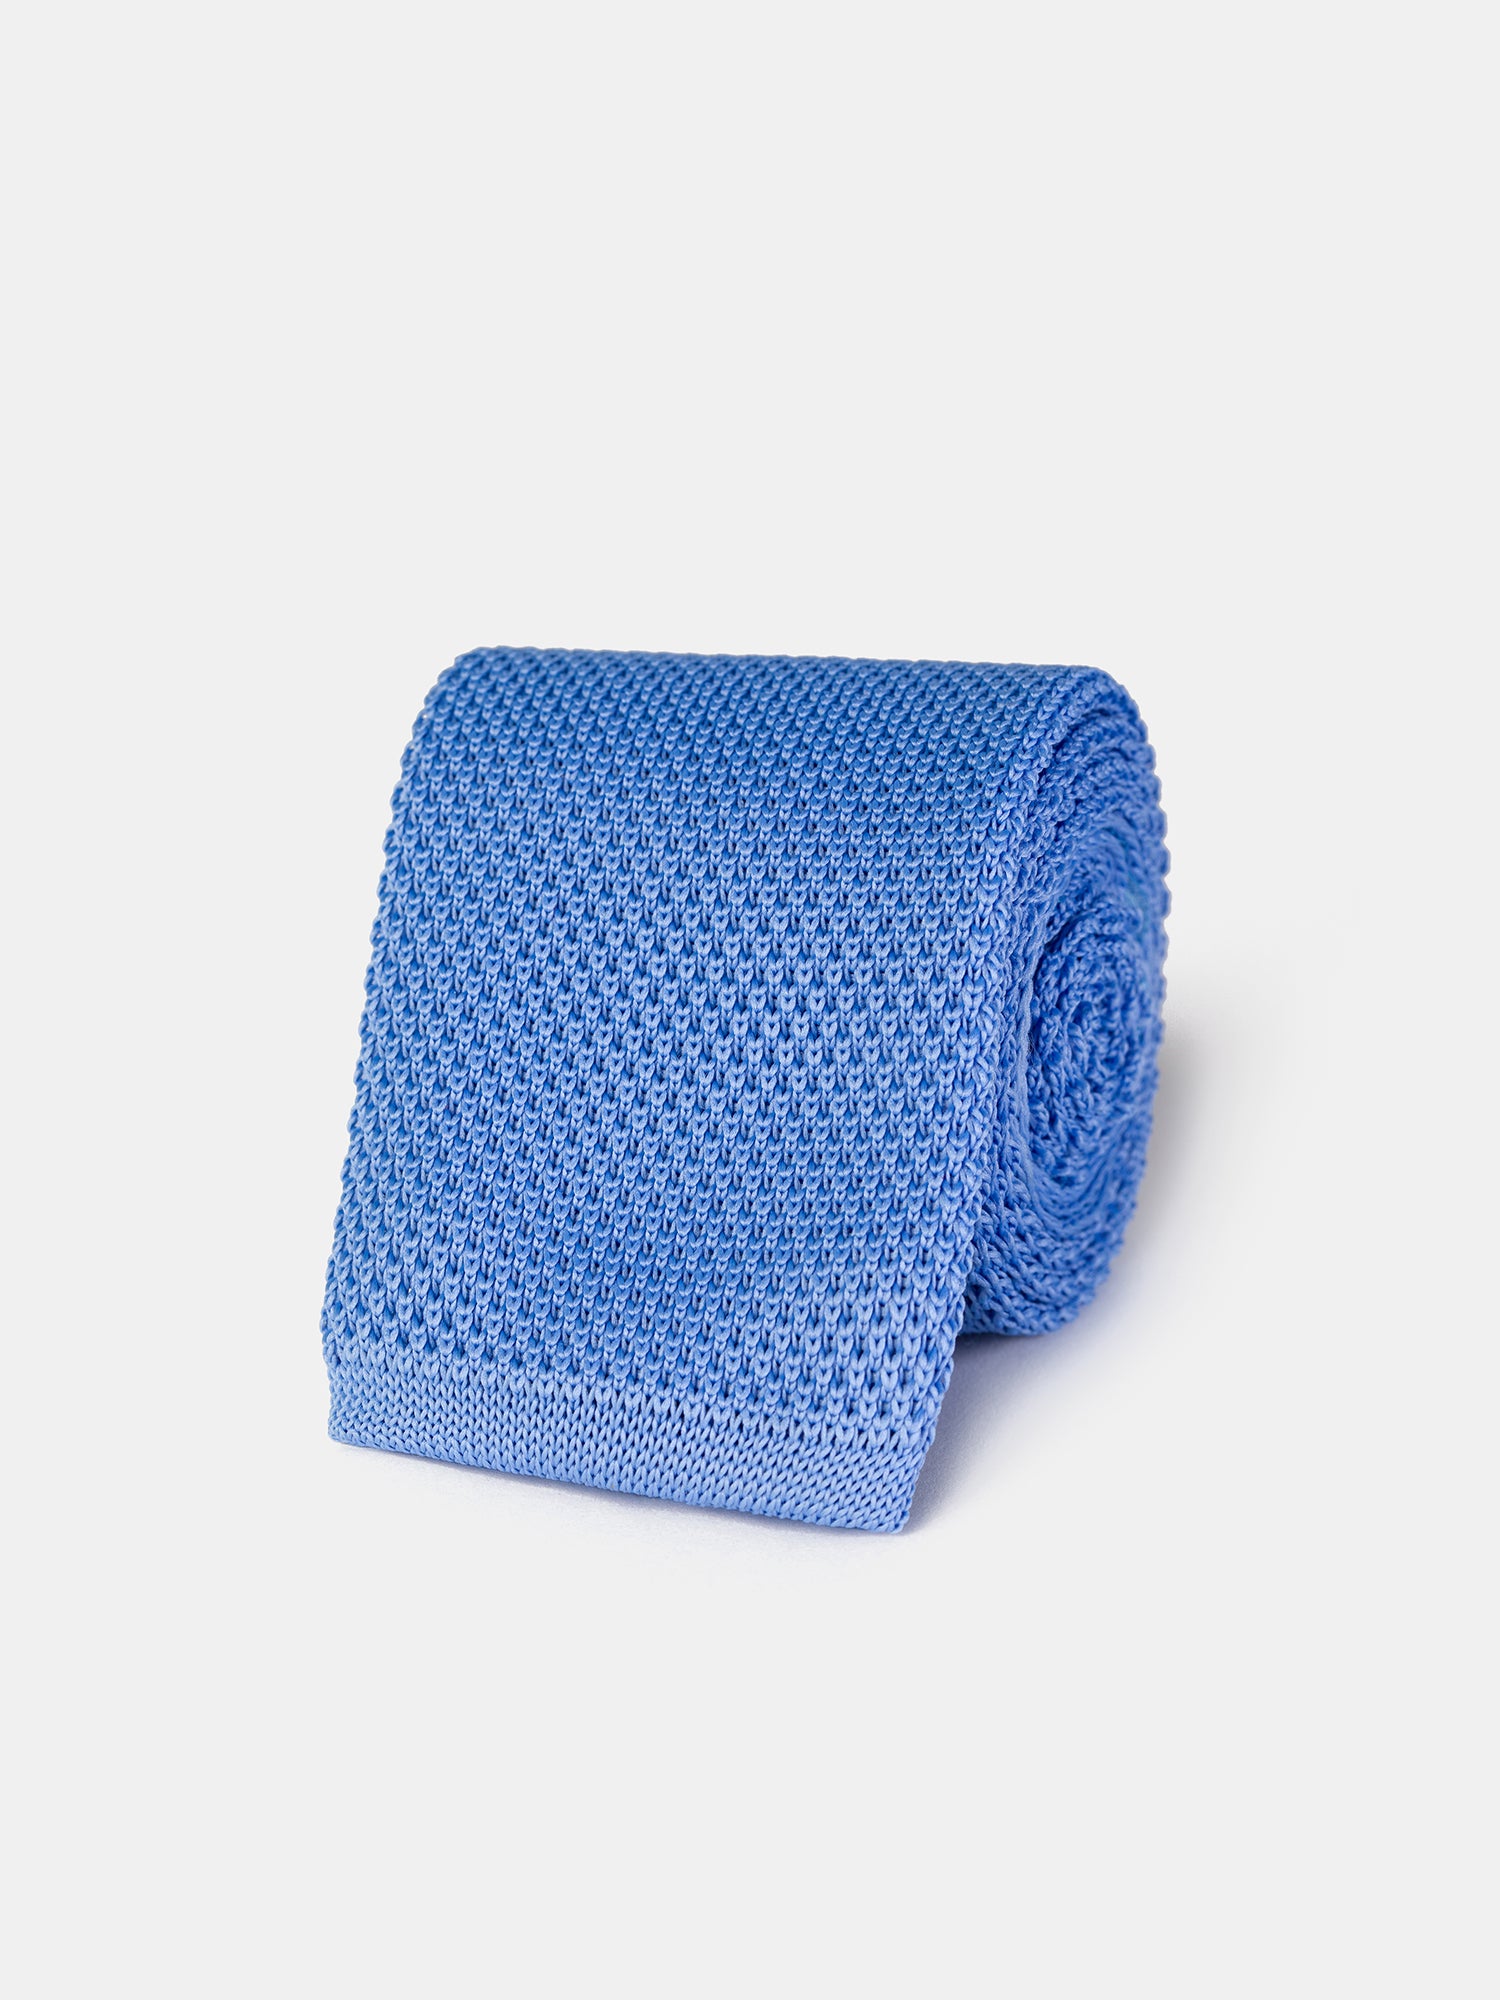 Sky-Blue Knitted Tie 6cm